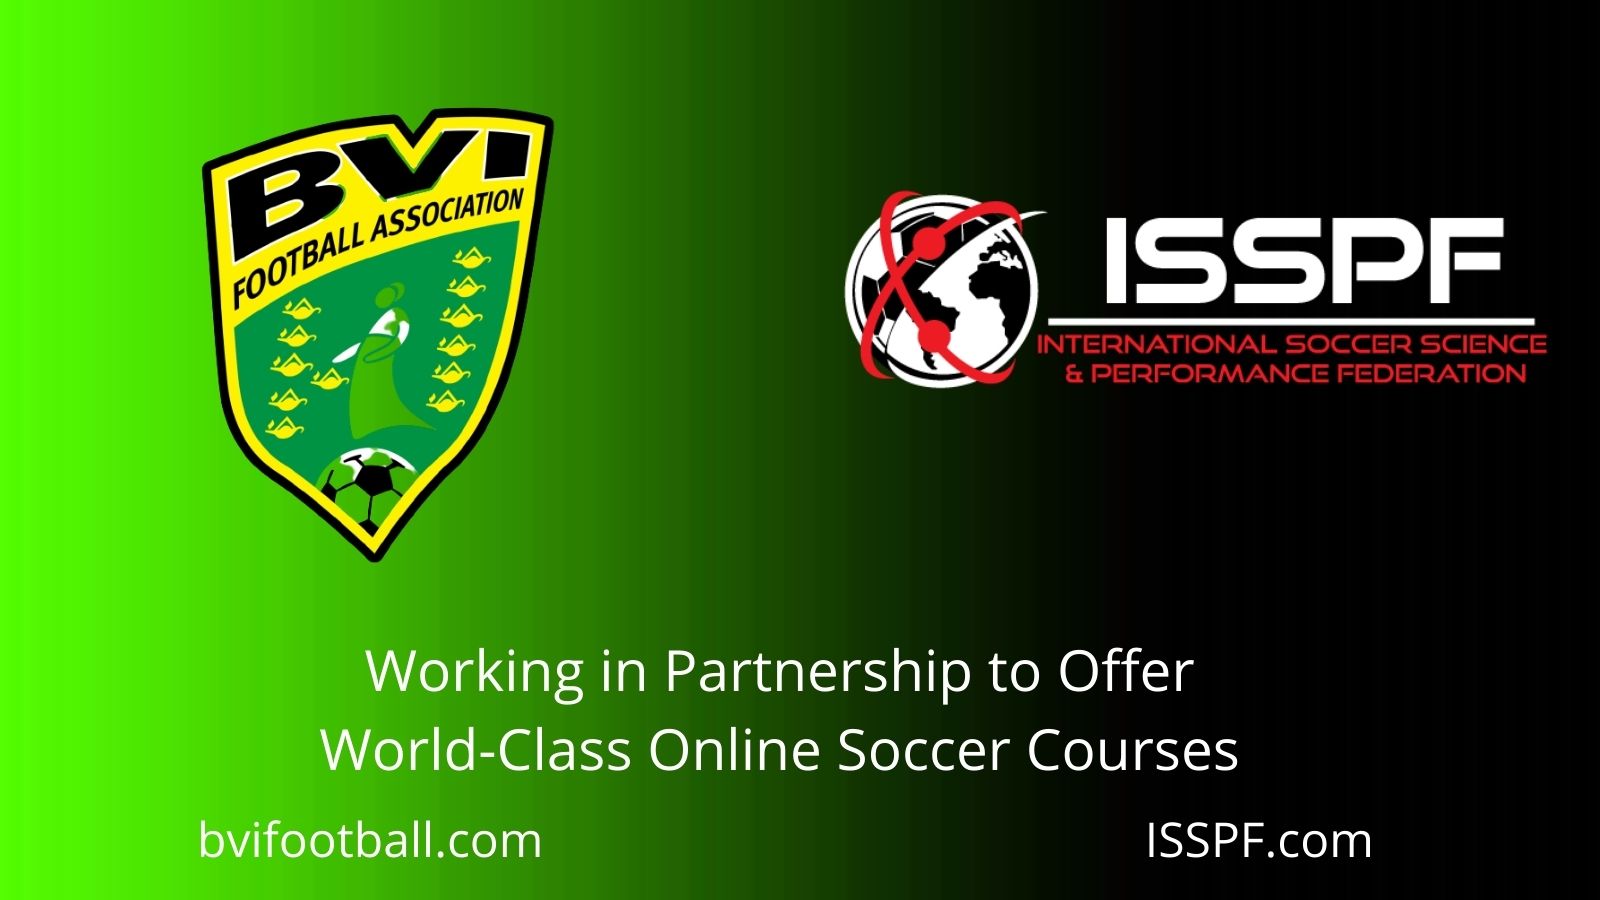 BVI football association signs partnership with international soccer science and performance federation to provide online training for bvi soccer professionals